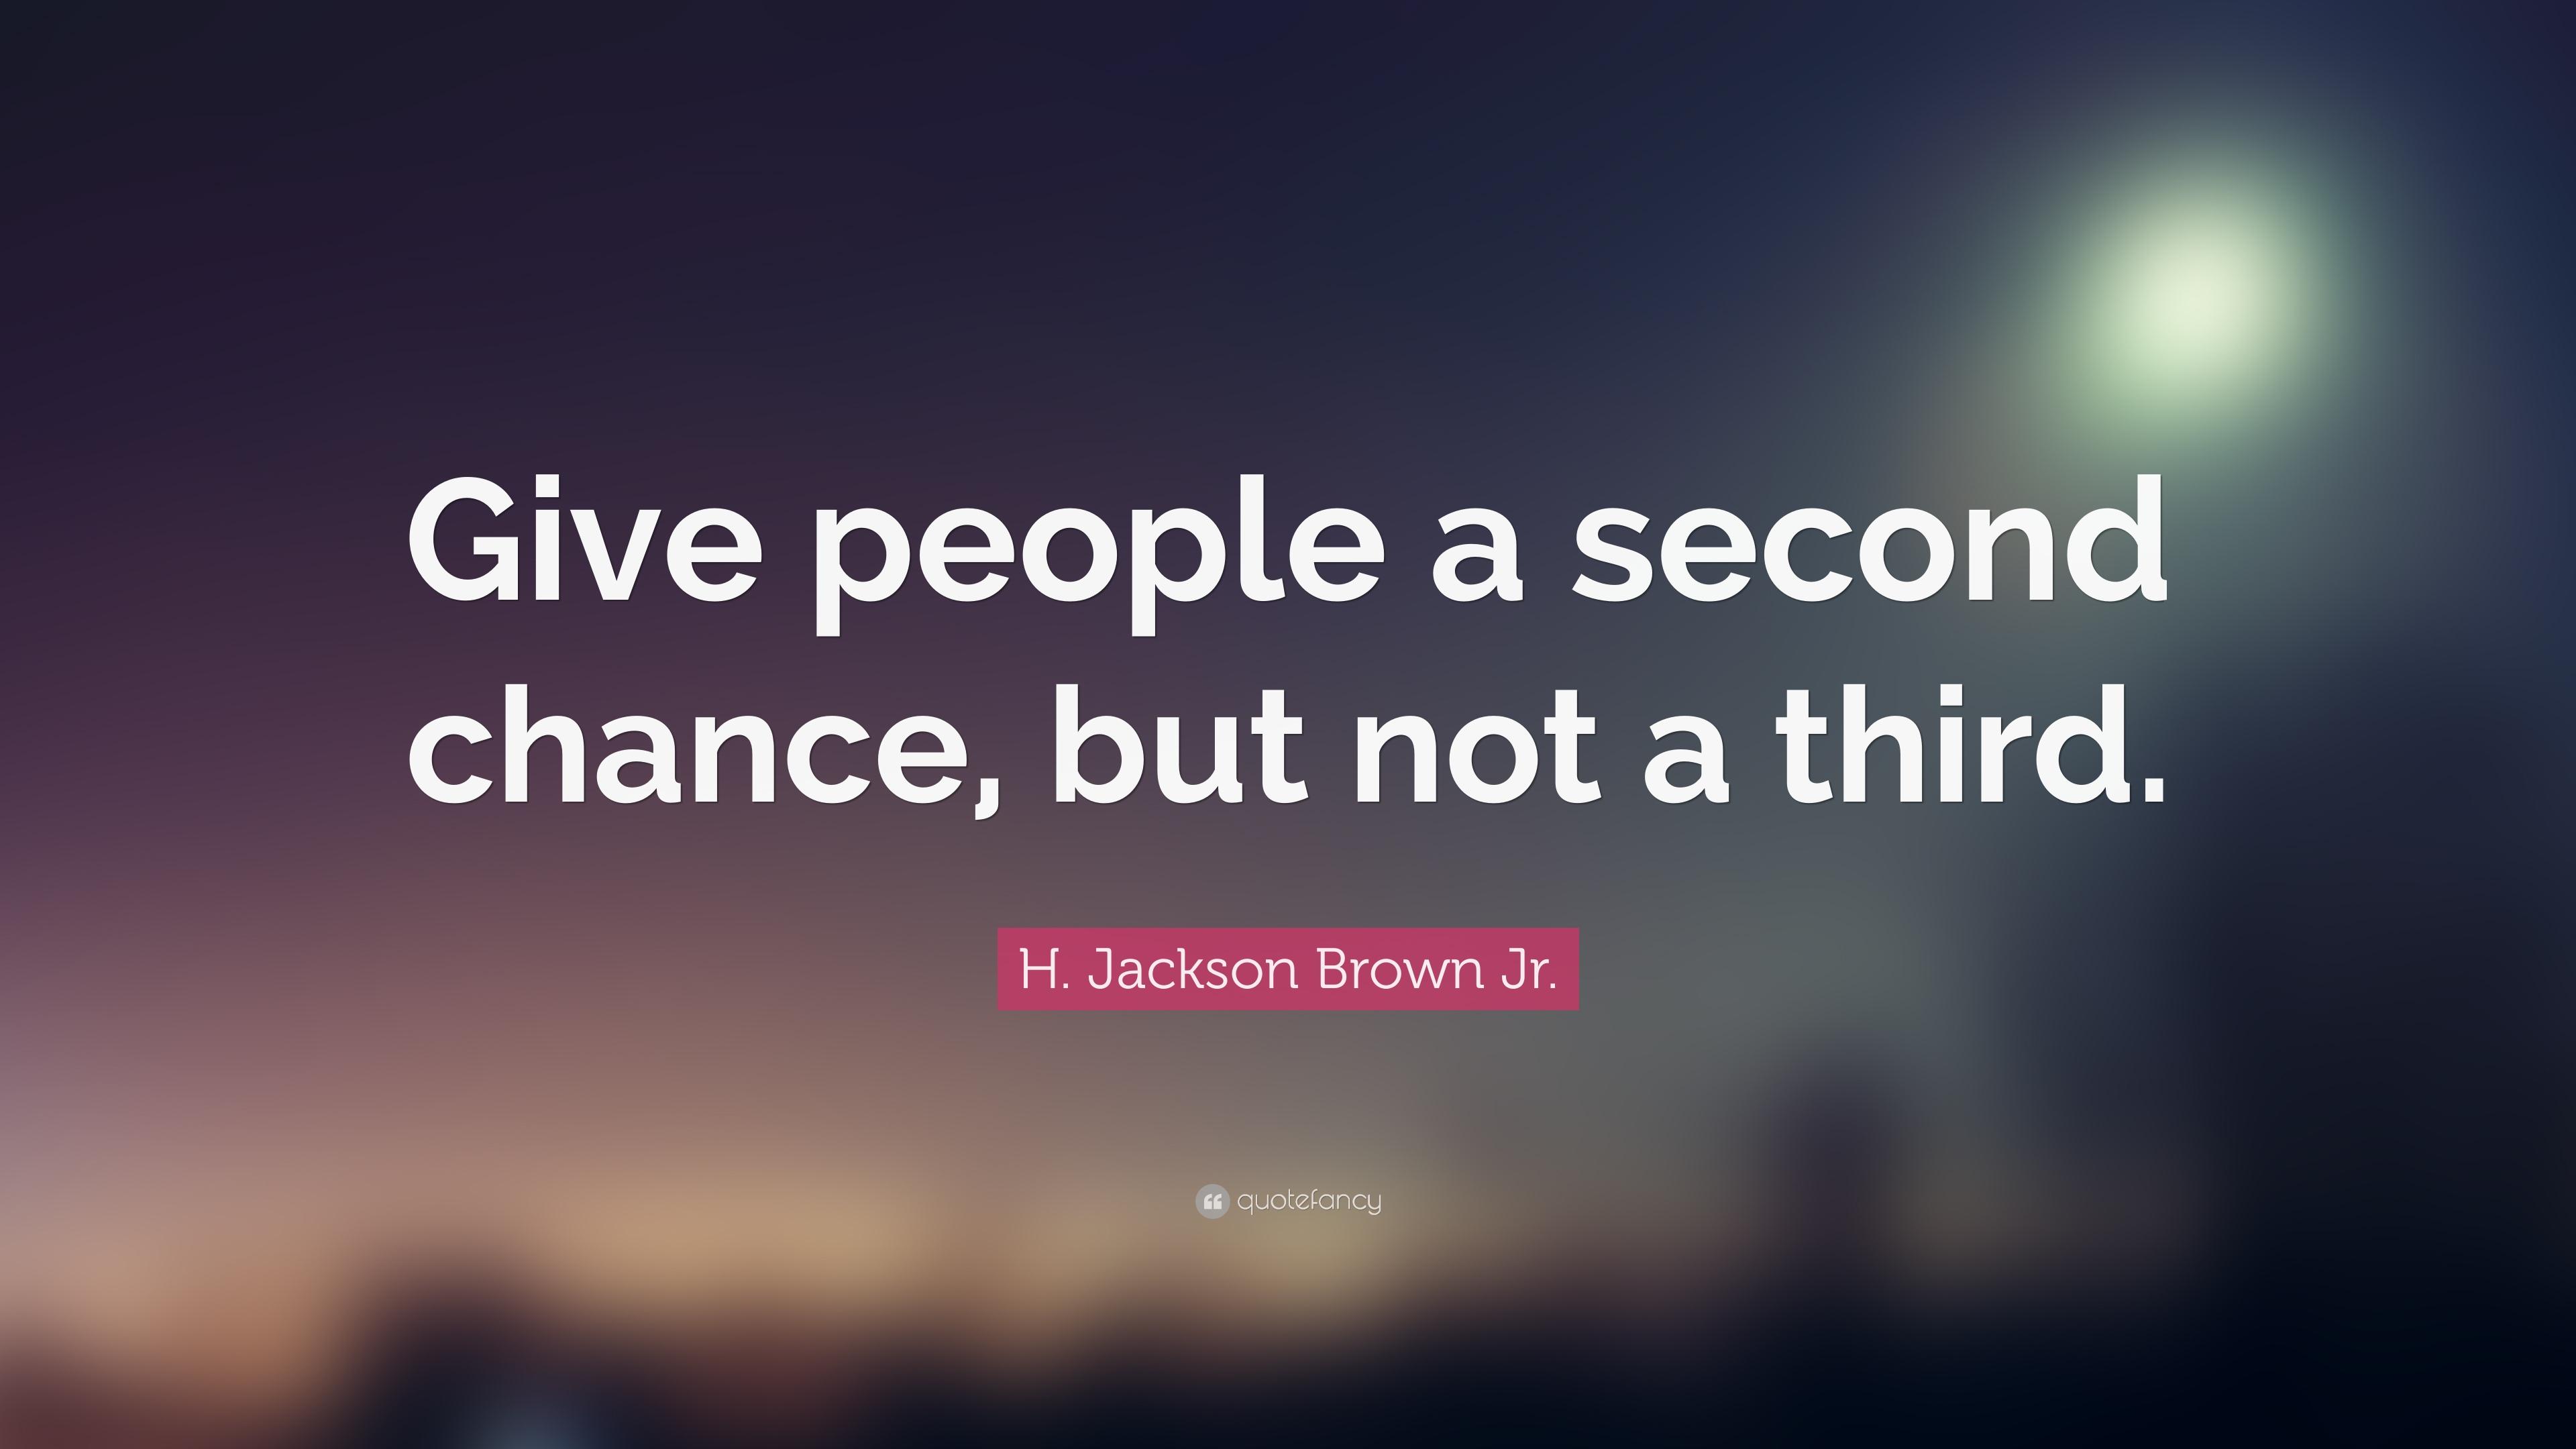 H. Jackson Brown Jr. Quote: “Give people a second chance